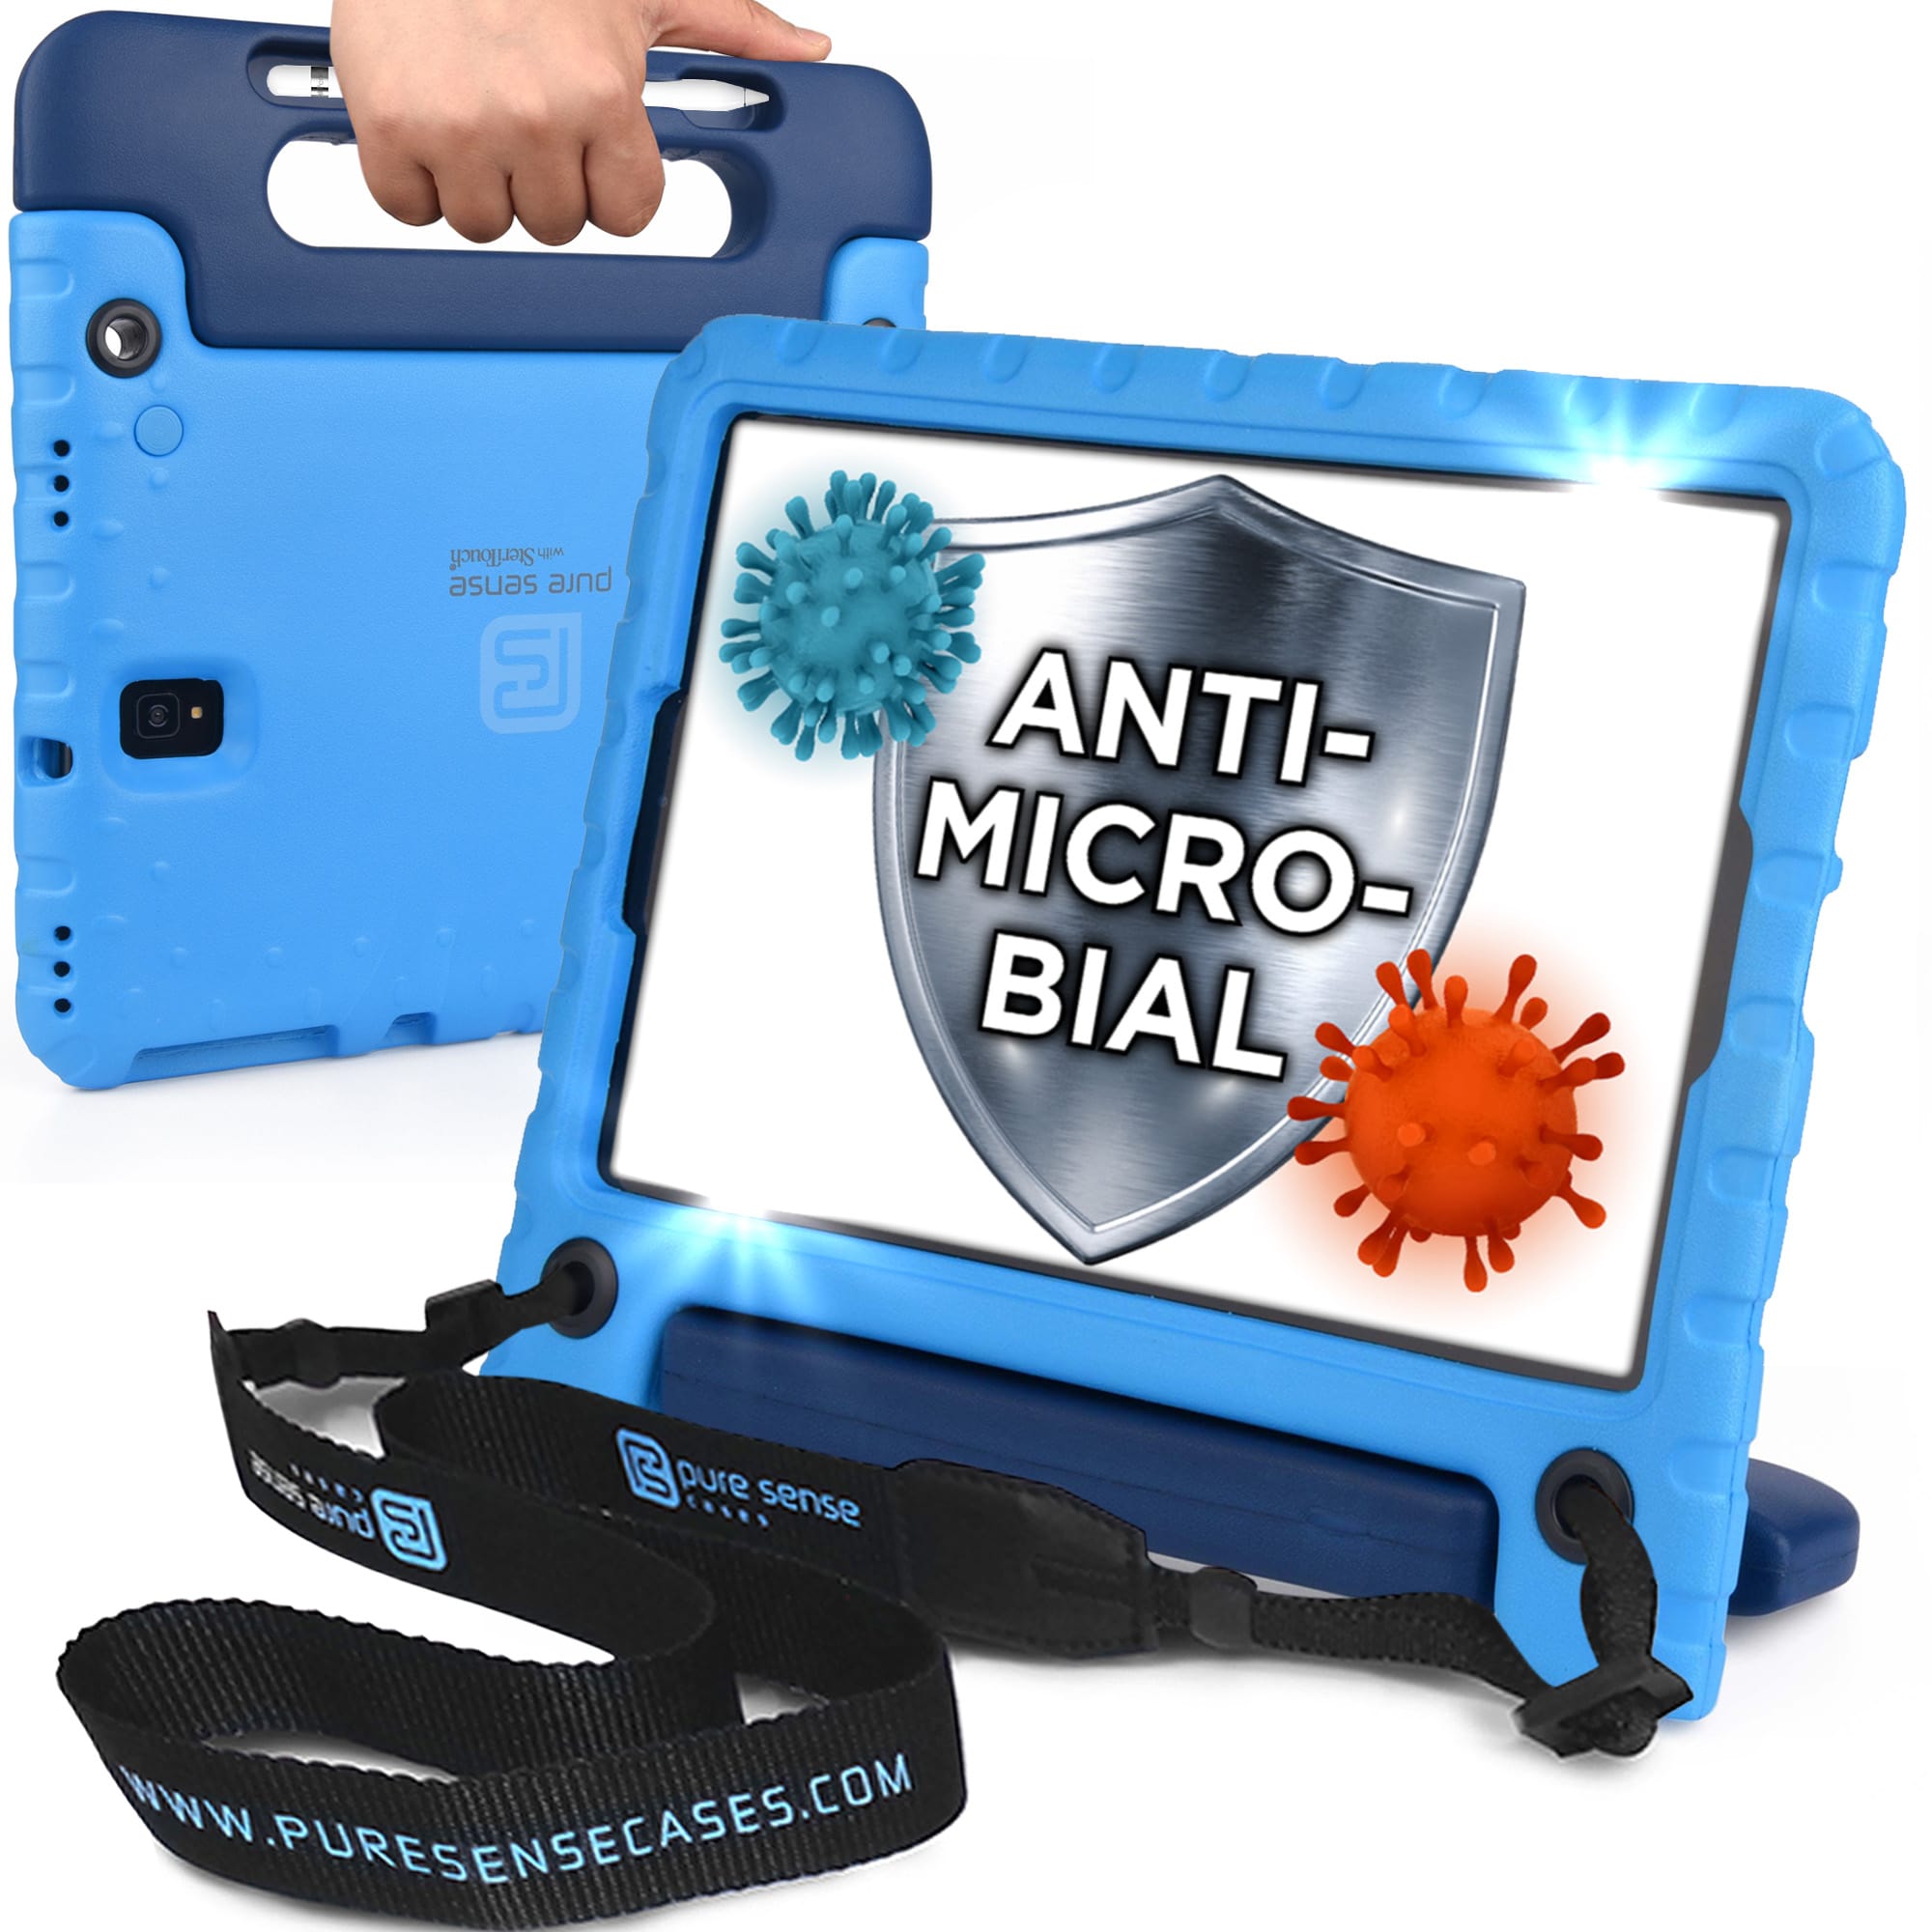 Buddy Antibacterial Protective Kids case for Samsung Galaxy Tab E 9.6 // Handle+Stand, Shoulder Strap, Screen Spray